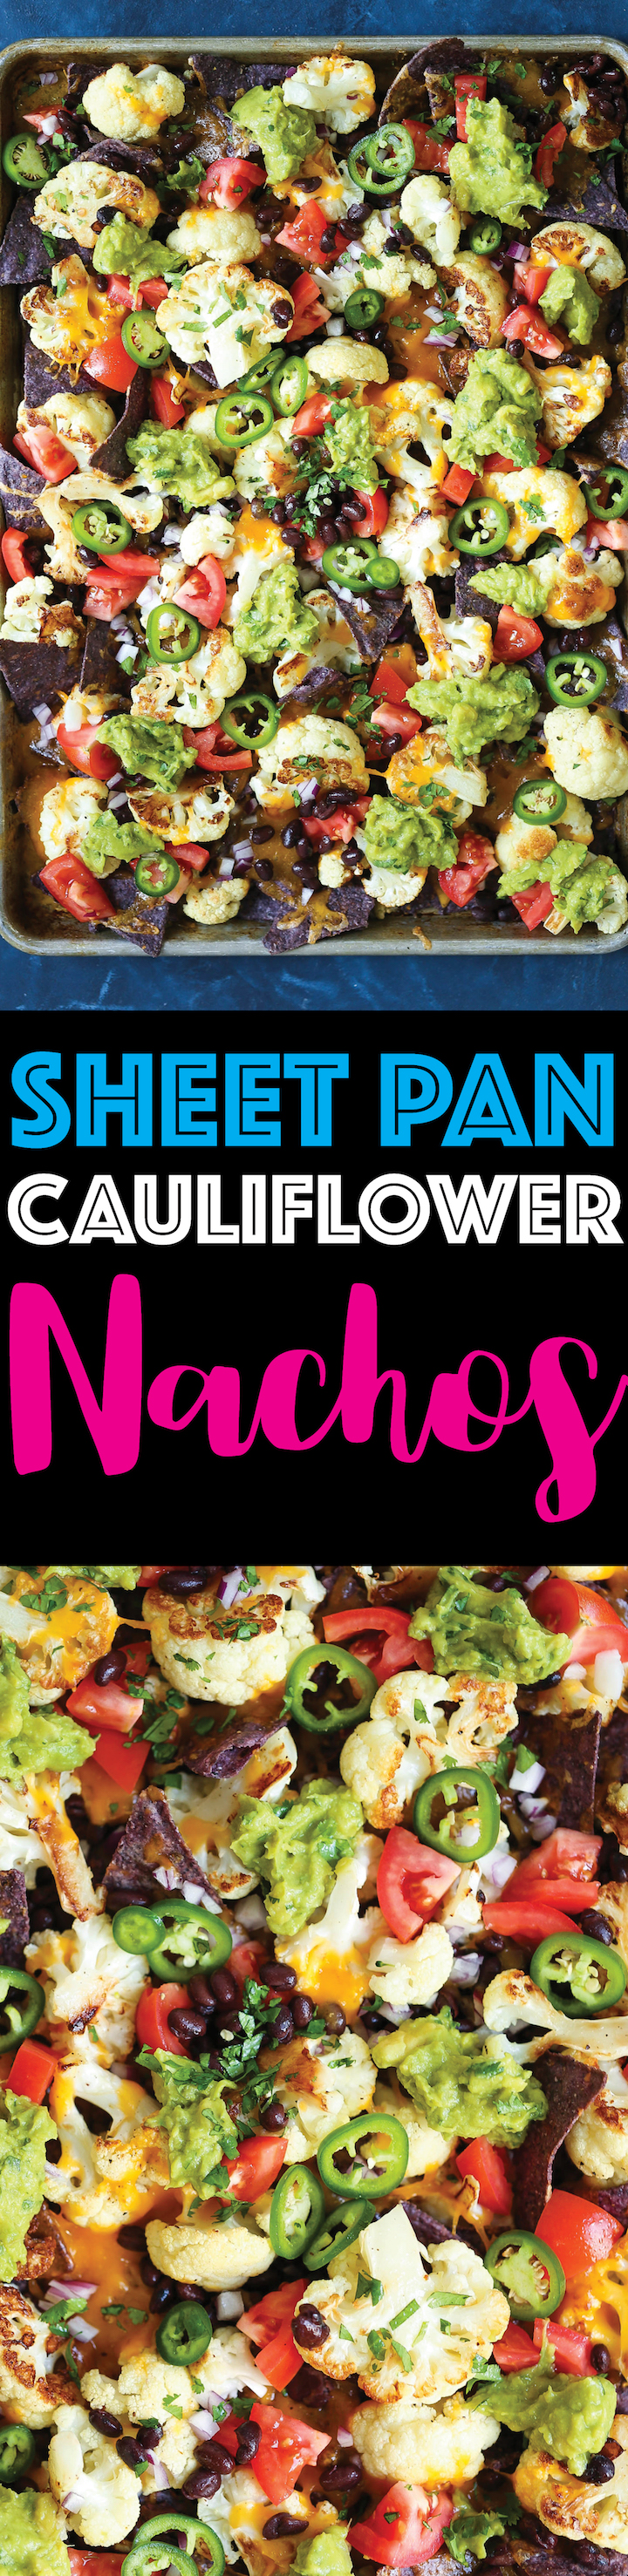 Sheet Pan Cauliflower Nachos - You can still get your nacho fix except with cauliflower! Except this is healthier, heartier and so stinking good. And you can make this on one single sheet pan. Easiest nachos EVER!!!